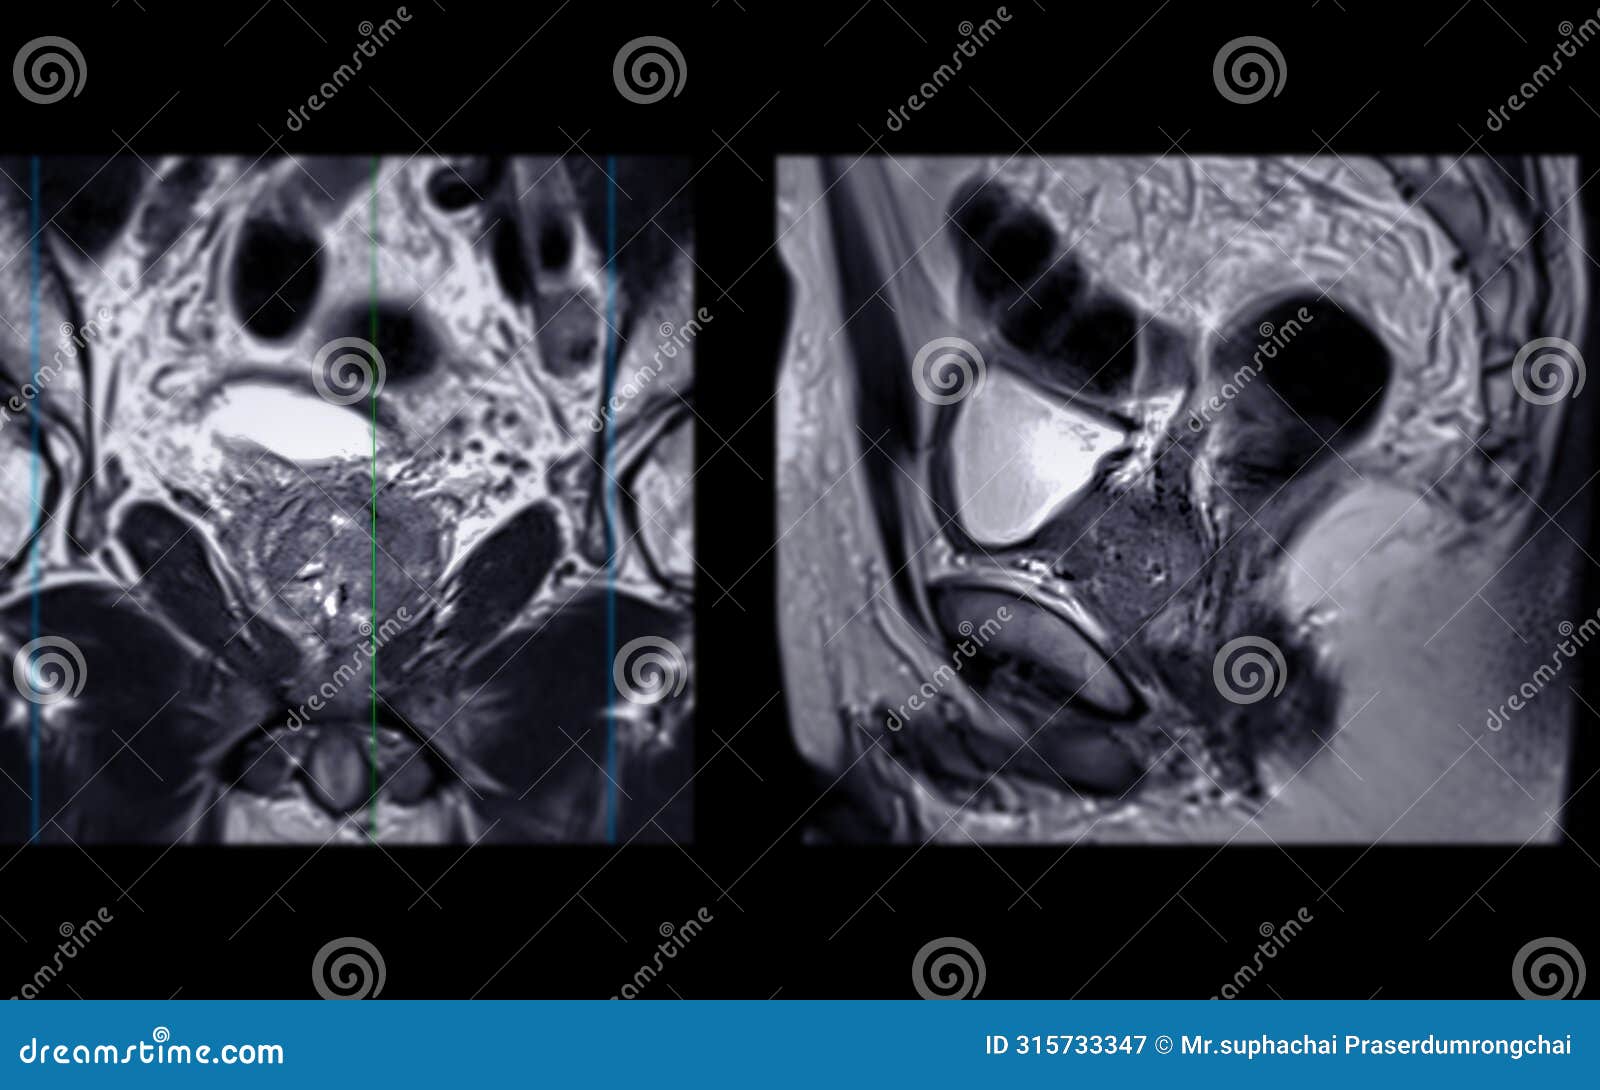 mri of the prostate gland reveals focal abnormal si lesion at left pzpl at apex as described; pi-rads category 4, clinically